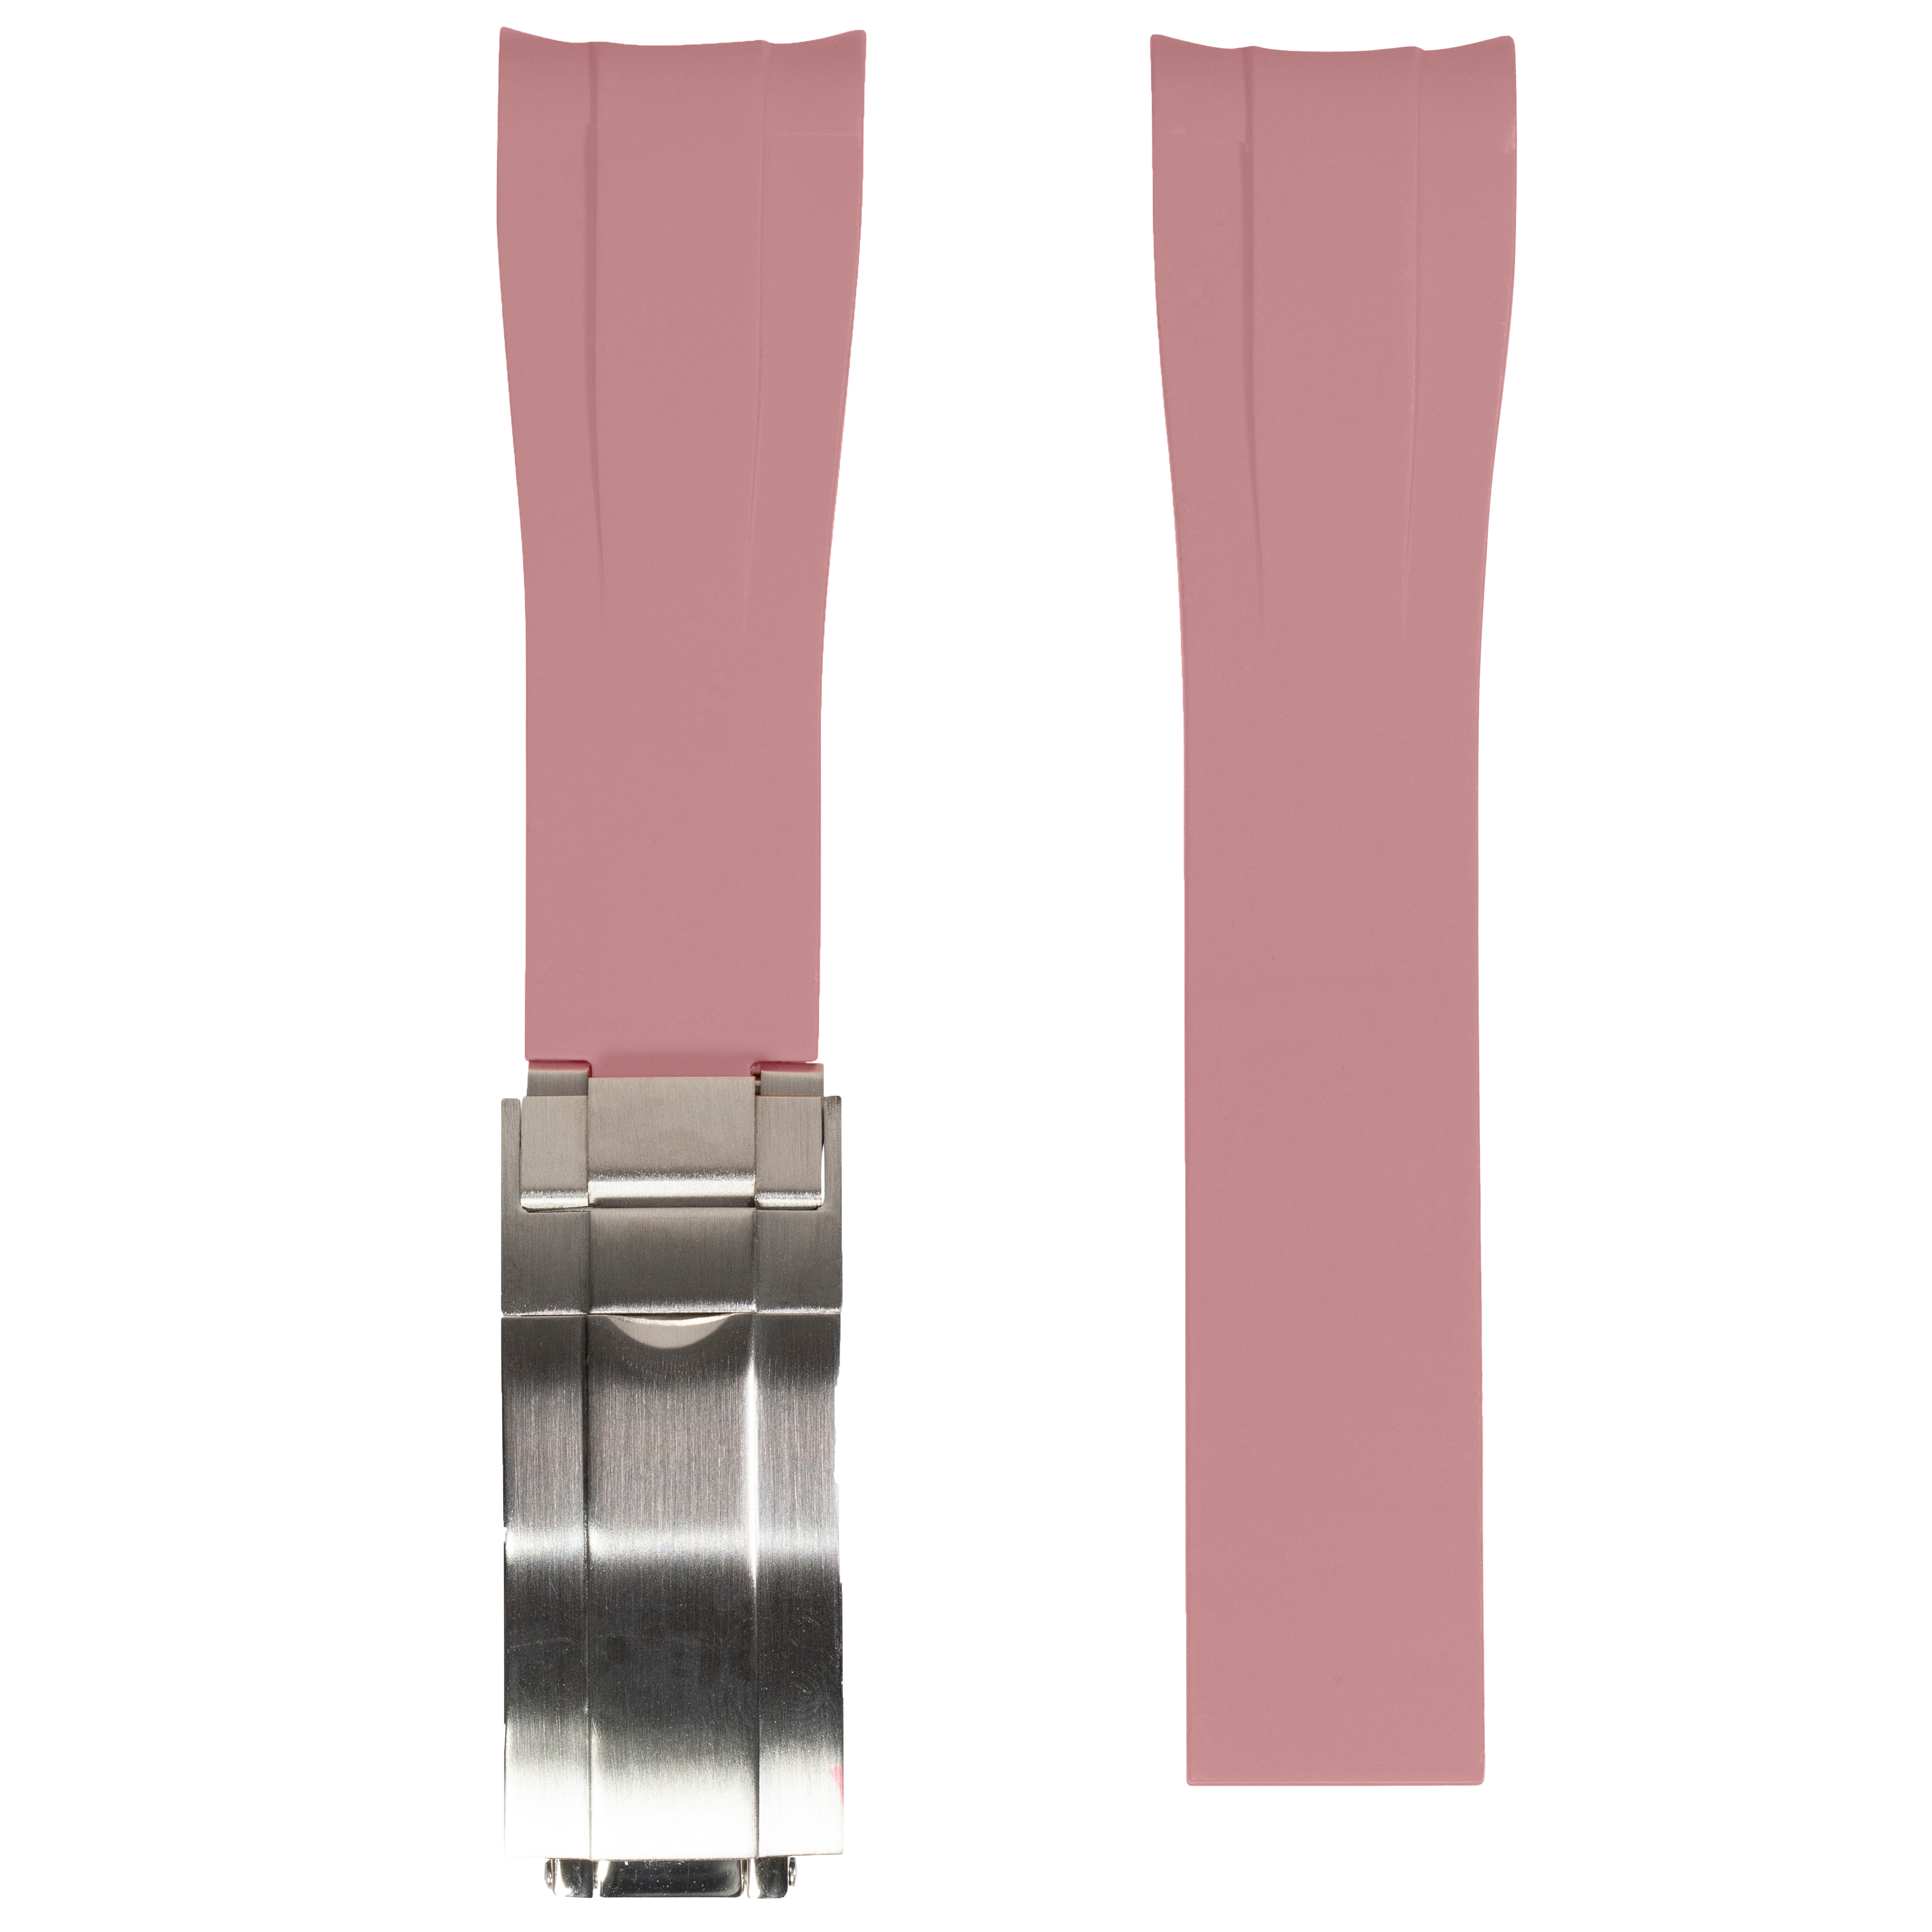 [Rolex Only] Vulcanised Rubber with Oyster Clasp  - Pink